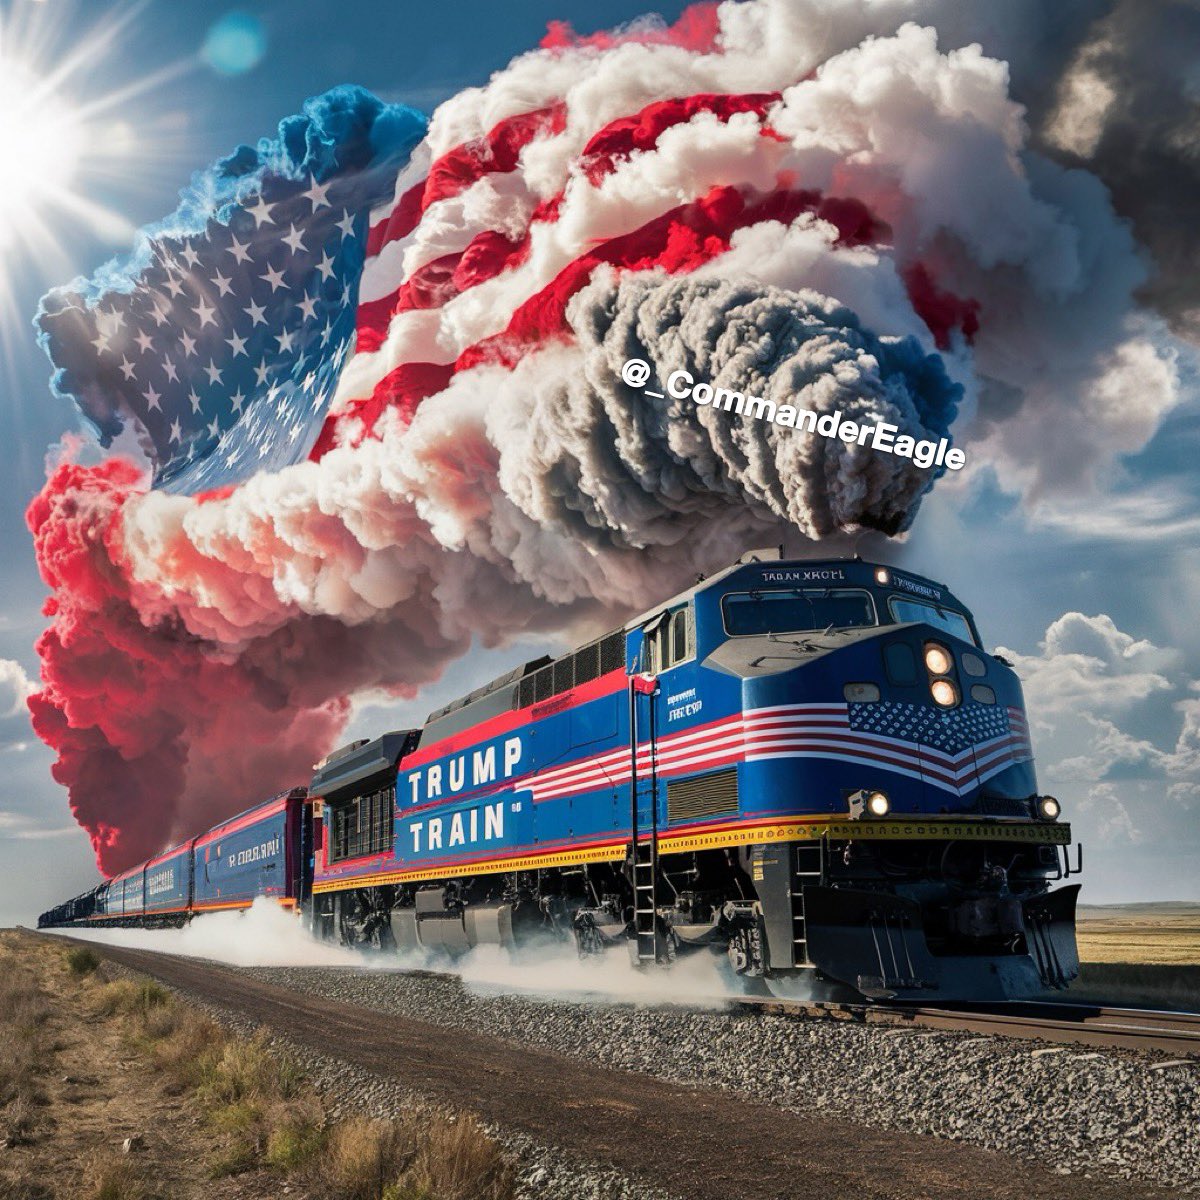 SUNDAY MORNING TRUMP TRAIN! ALL ABOARD!!! 🚂 💨 🚂 💨 🚂 💨 💨 FOLLOW BACK ALL PATRIOTS! 🇺🇸🇺🇸🇺🇸 DROP YOUR HANDLES!!! @@@ REPOST = MORE GROWTH ↪️ GROW TOGETHER!!! 💪💪💪 LET’S GO!!! 🔥🔥🔥 #PatriotsUnite